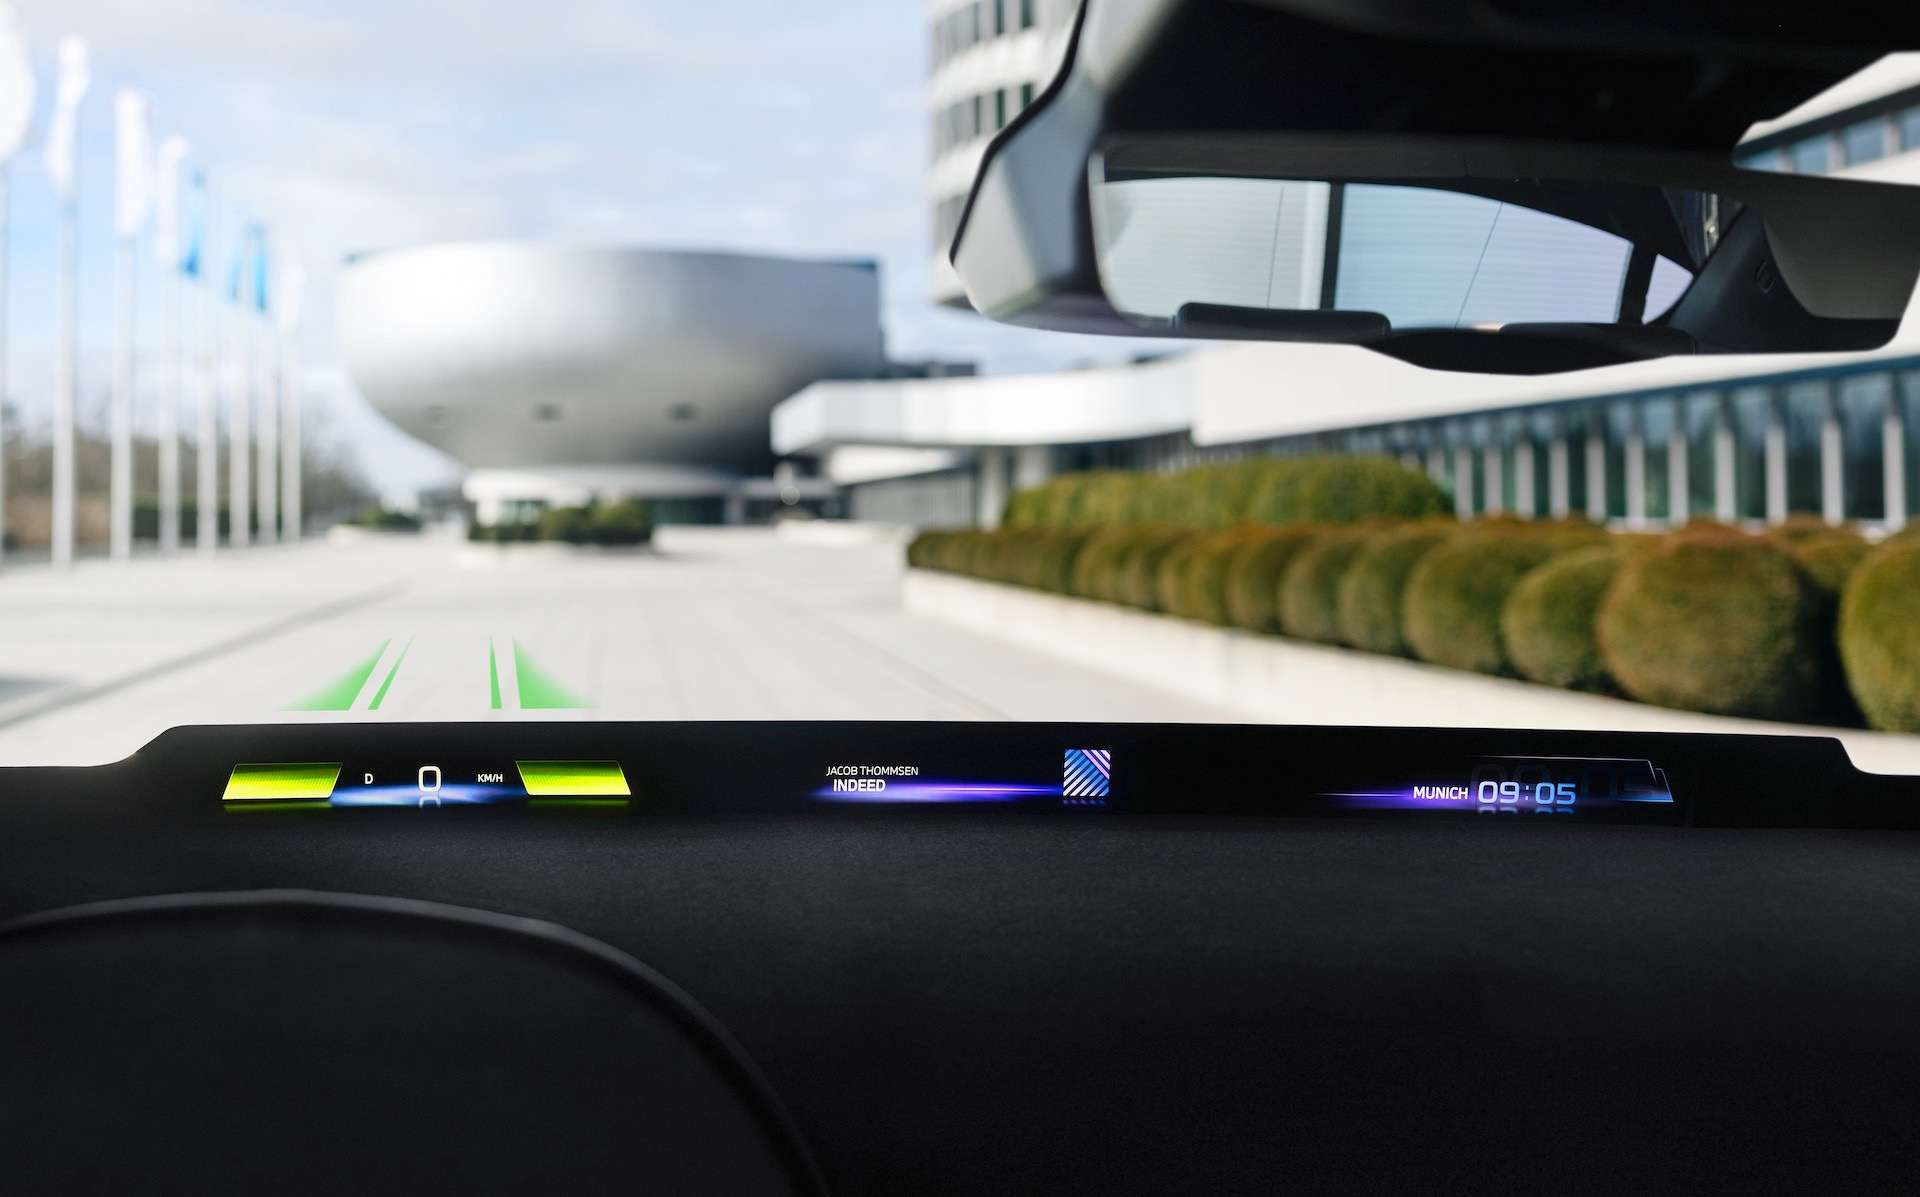 BMW launching full-width ‘Panoramic Vision’ head-up display in 2025